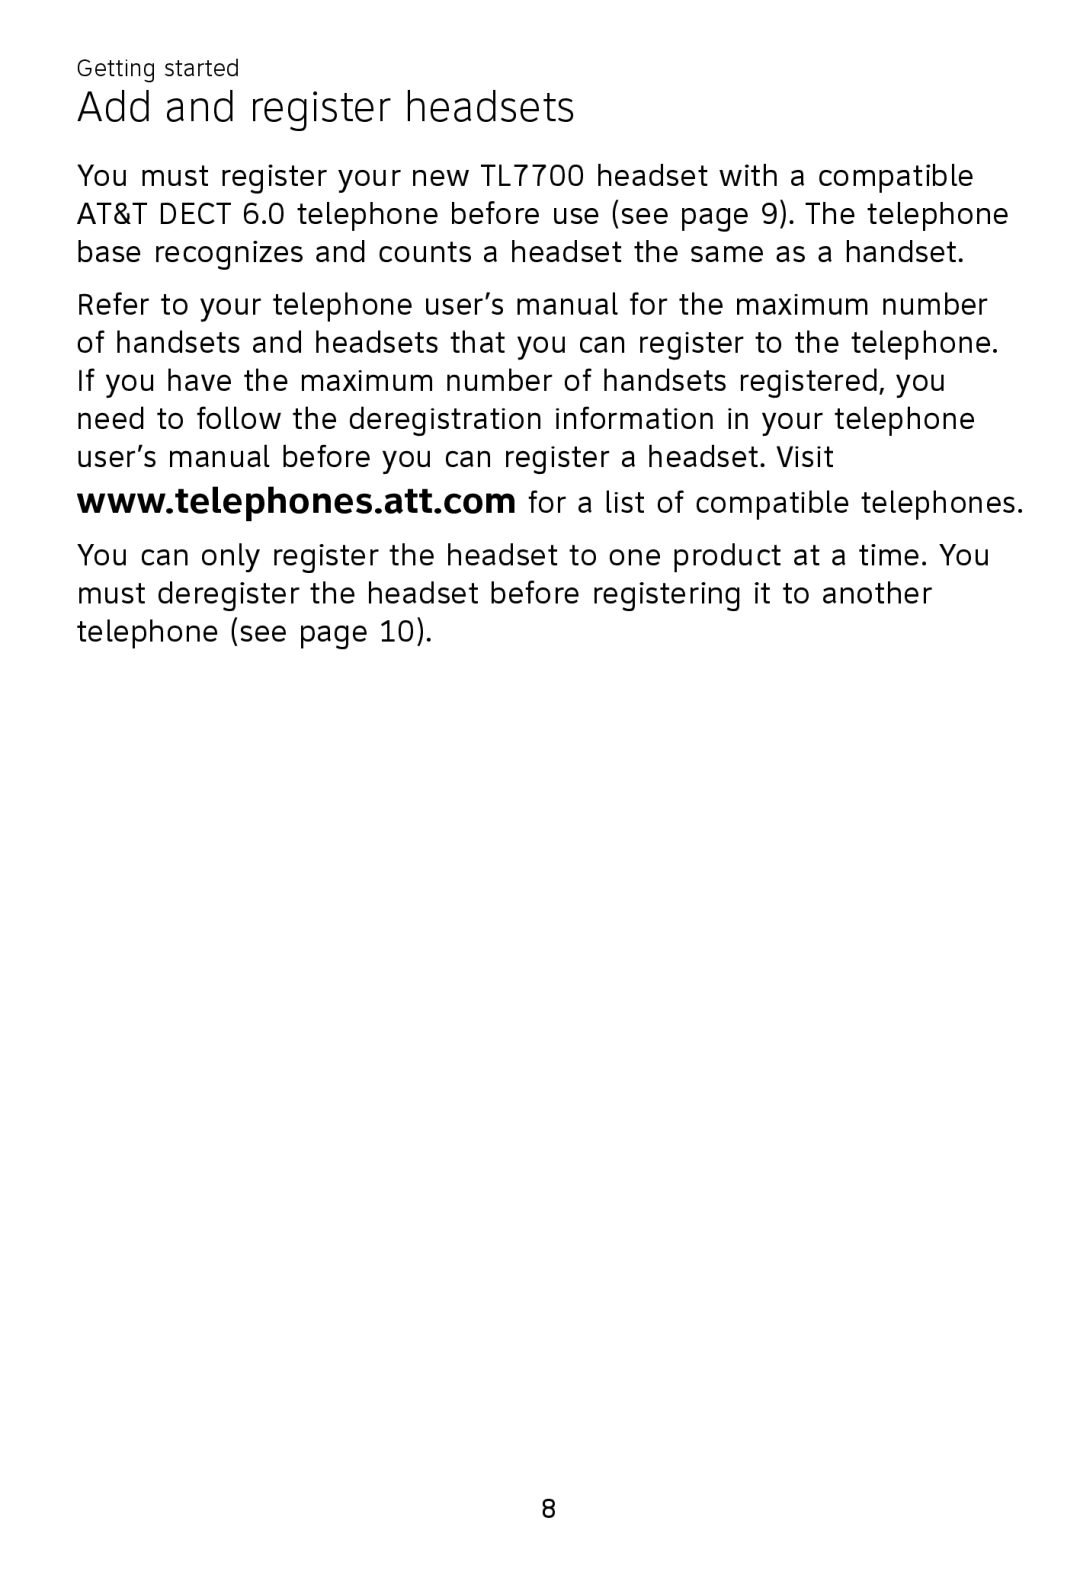 AT&T TL7700 user manual Add and register headsets 